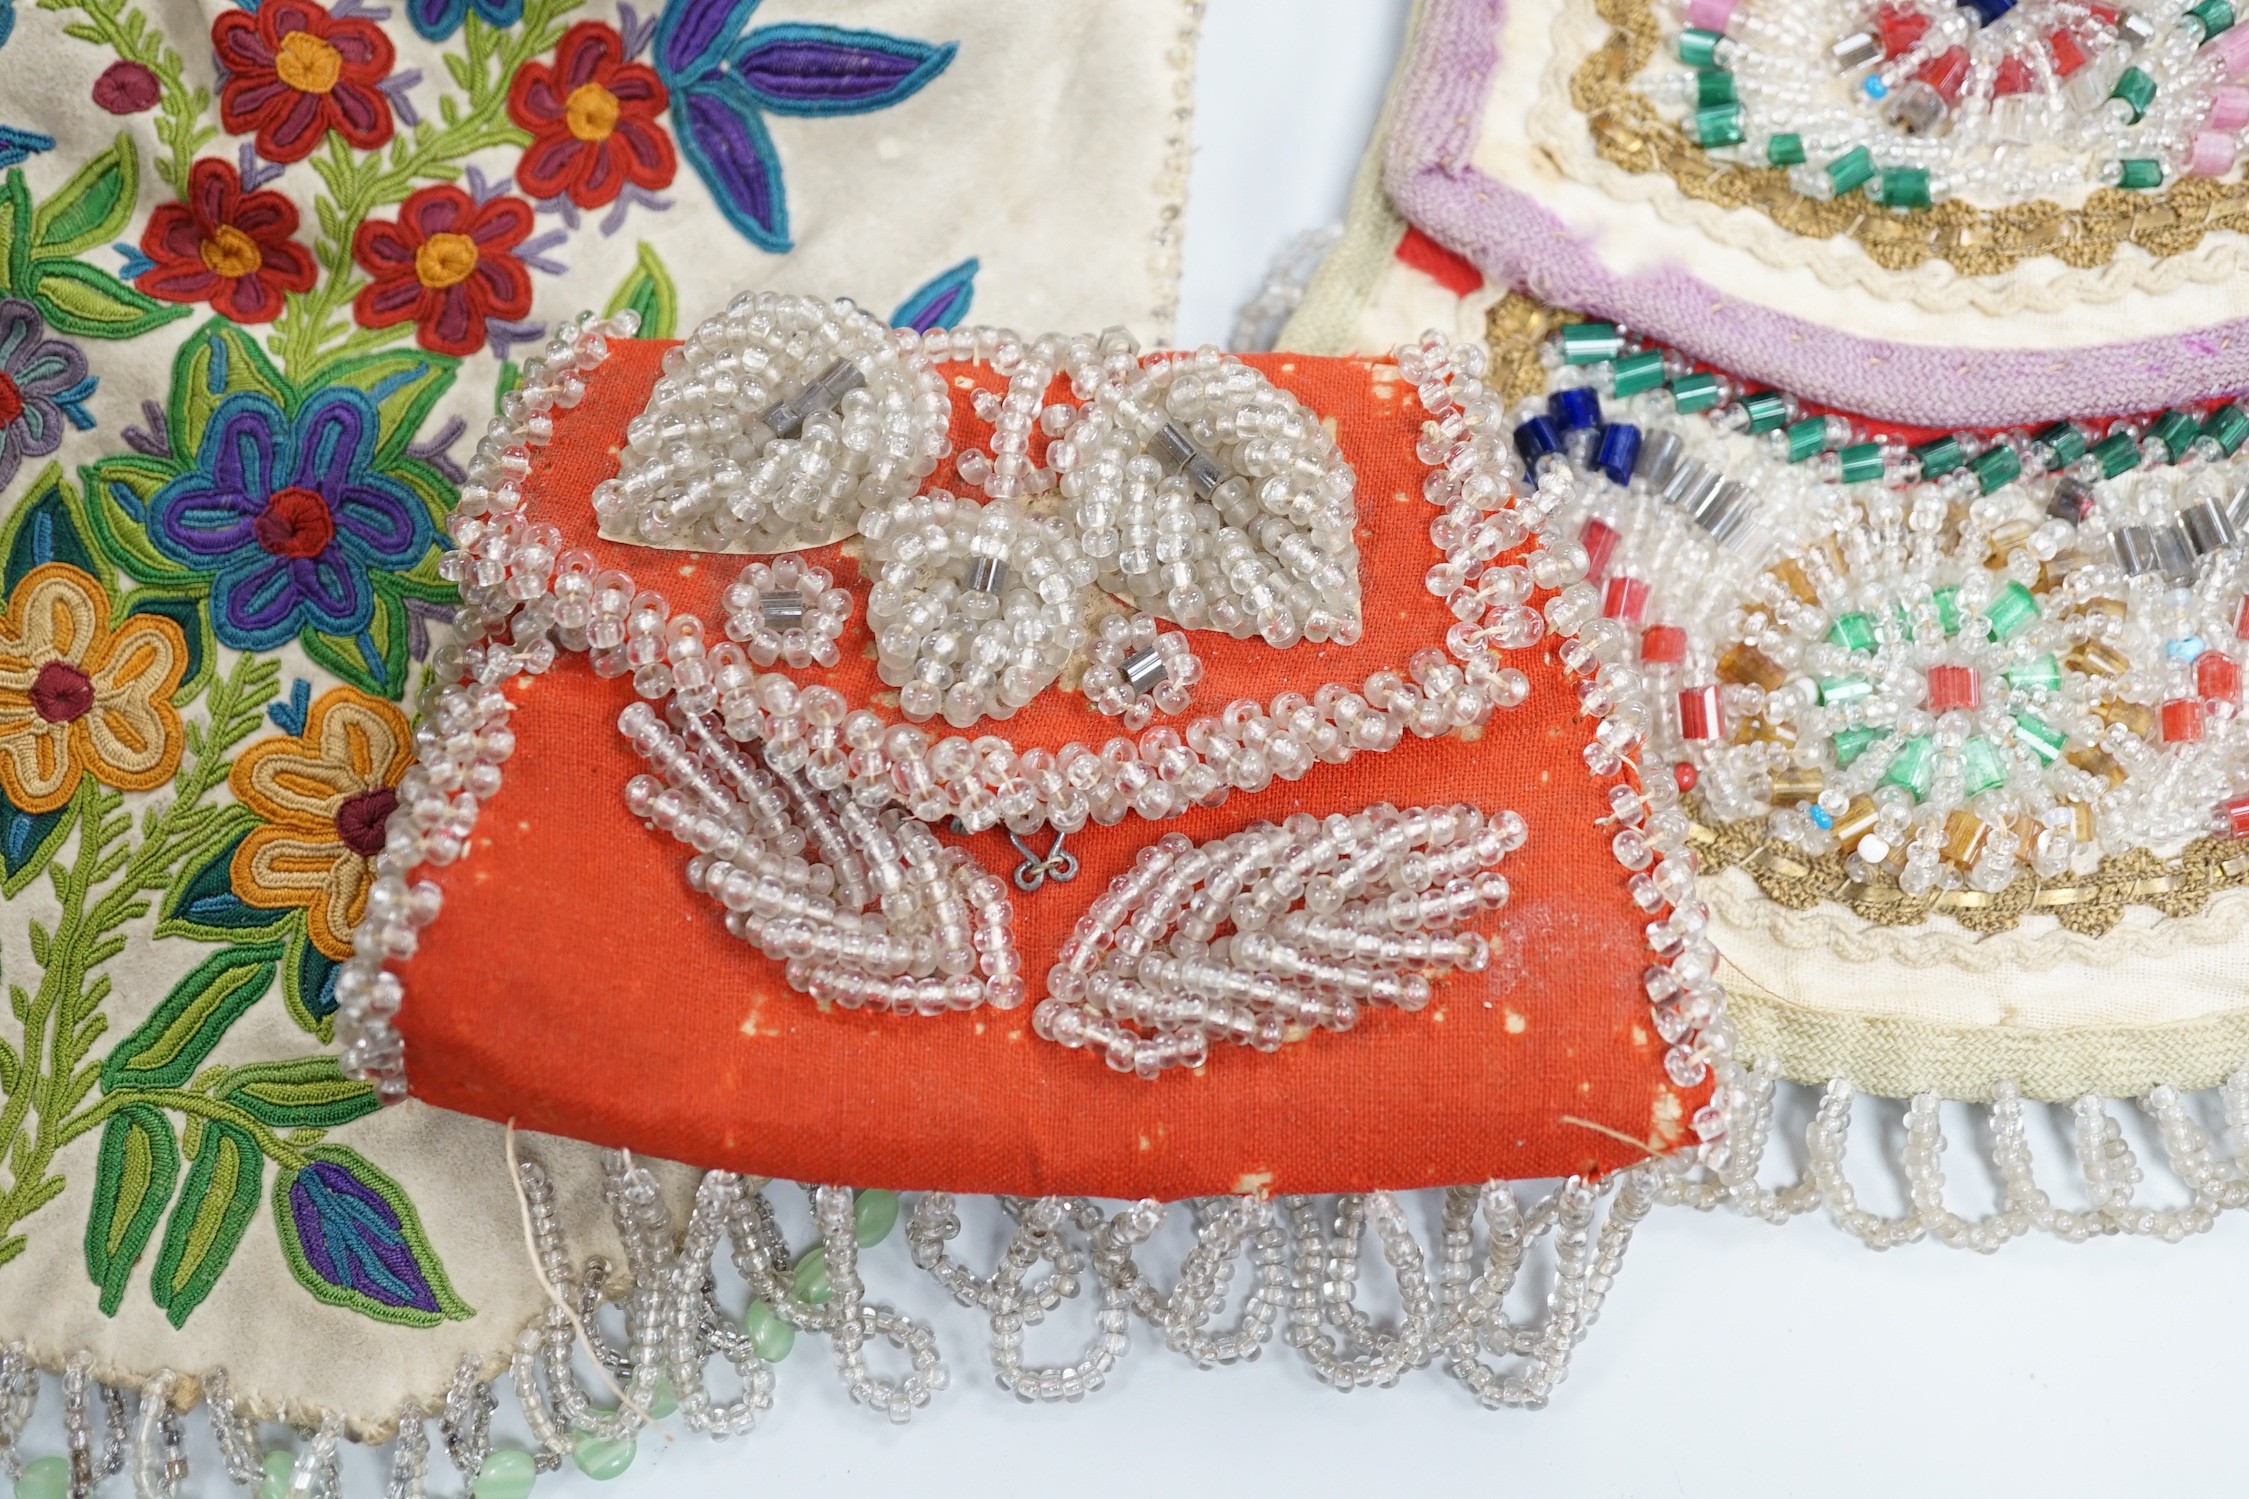 A mid to late 19th century Iroquois, North American/Canadian Indian glass beadwork bag on linen, - Image 2 of 5